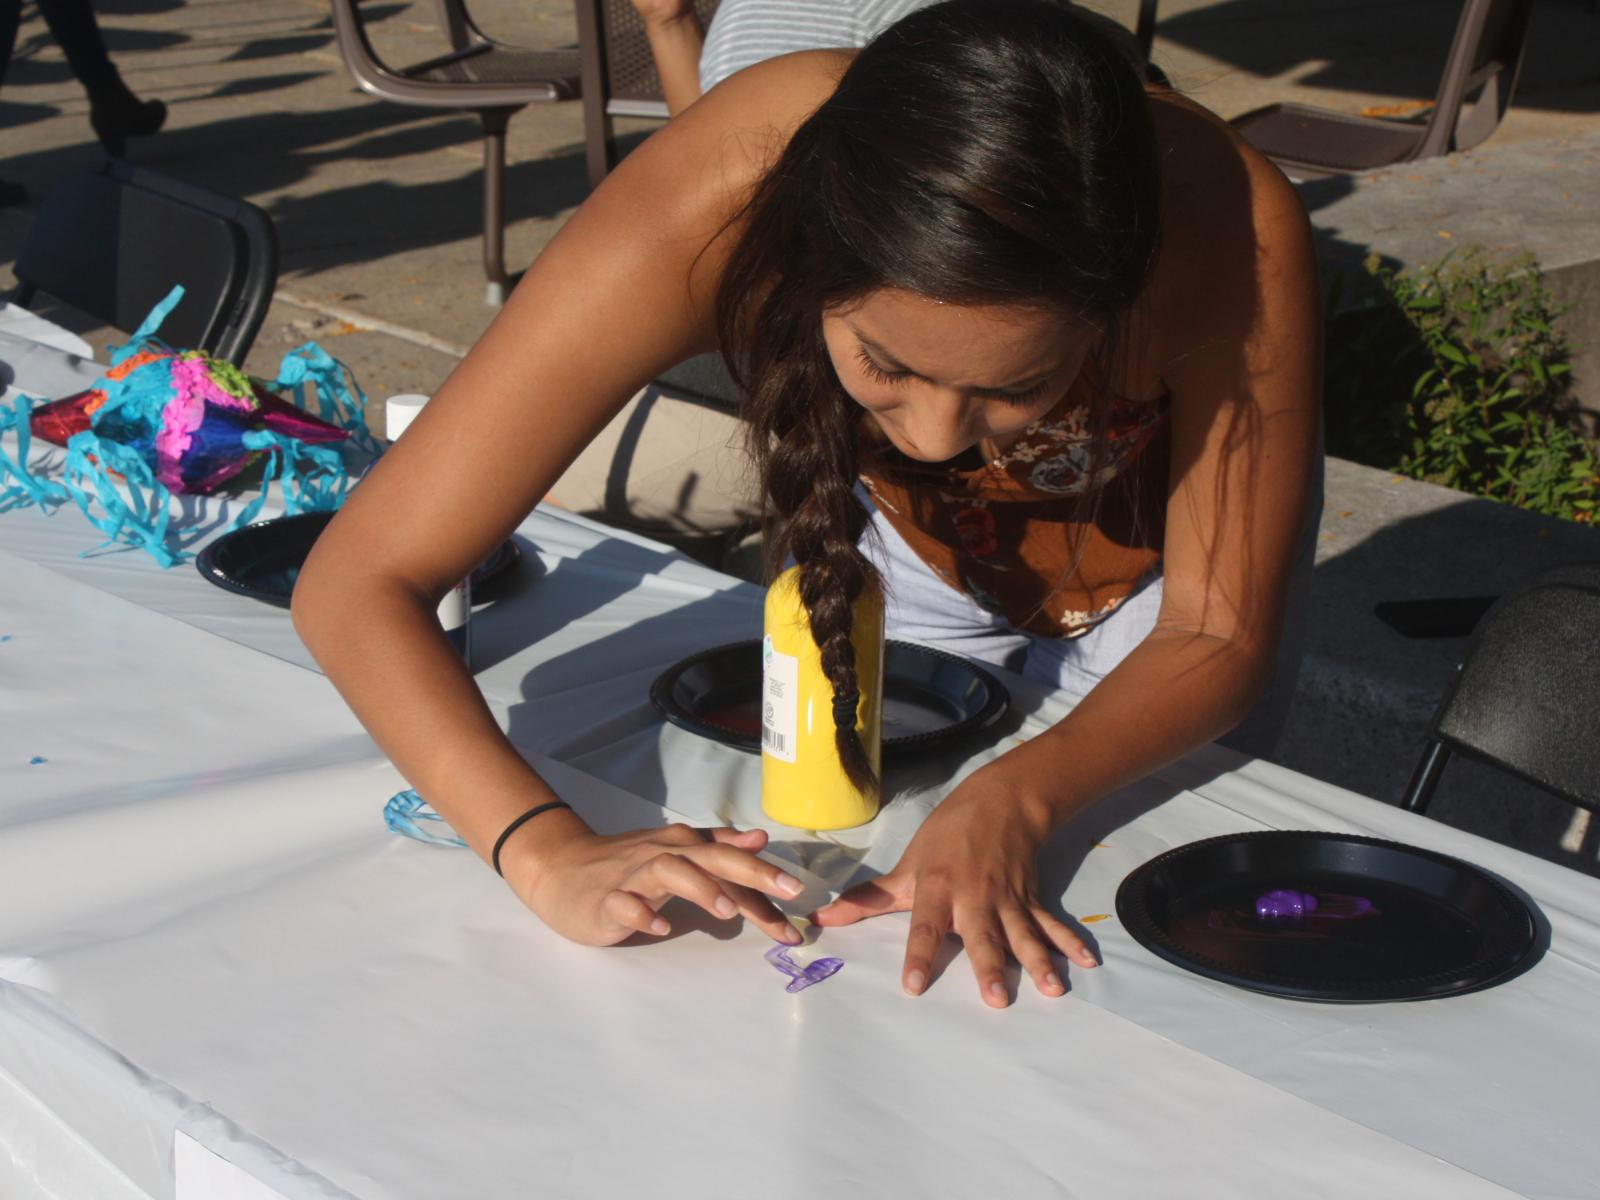 Students celebrate Hispanic heritage with fingerpainting at Fiesta on the Green at the University of Nebraska-Lincoln.